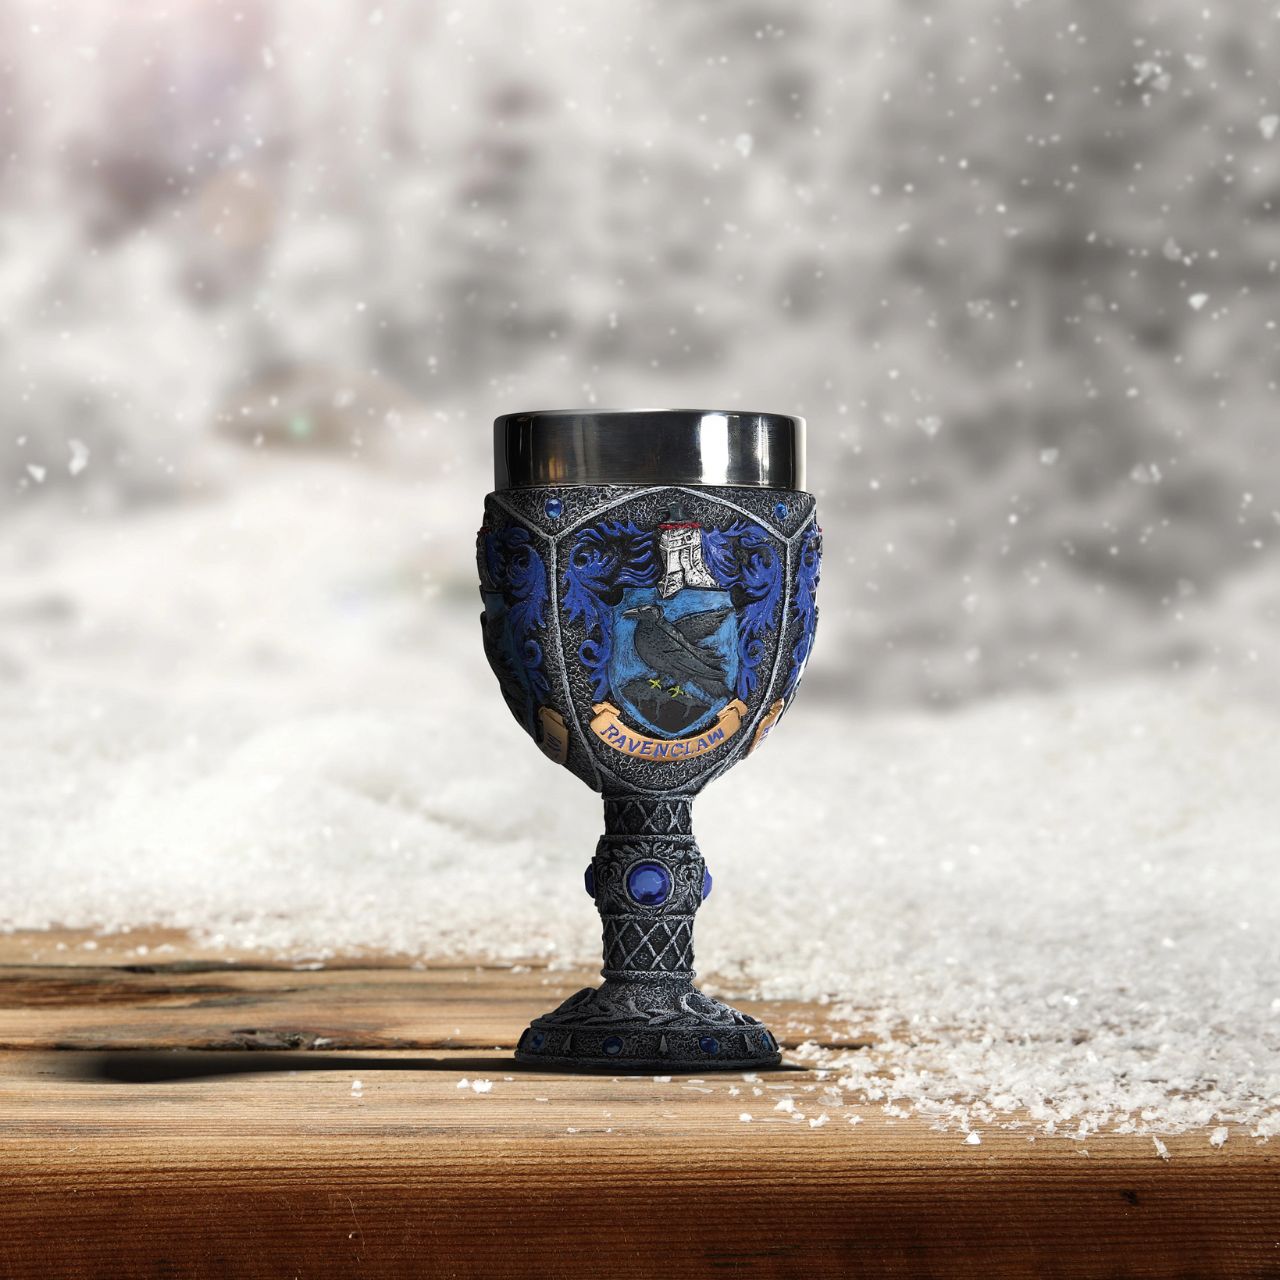 Harry Potter Ravenclaw Decorative Goblet  Wit beyond measure is man's greatest treasure is an ethos that the Ravenclaw house students live by. As Ravenclaws prize wit, learning, and wisdom. Many of Harry Potter's friends are kind Ravenclaw students.